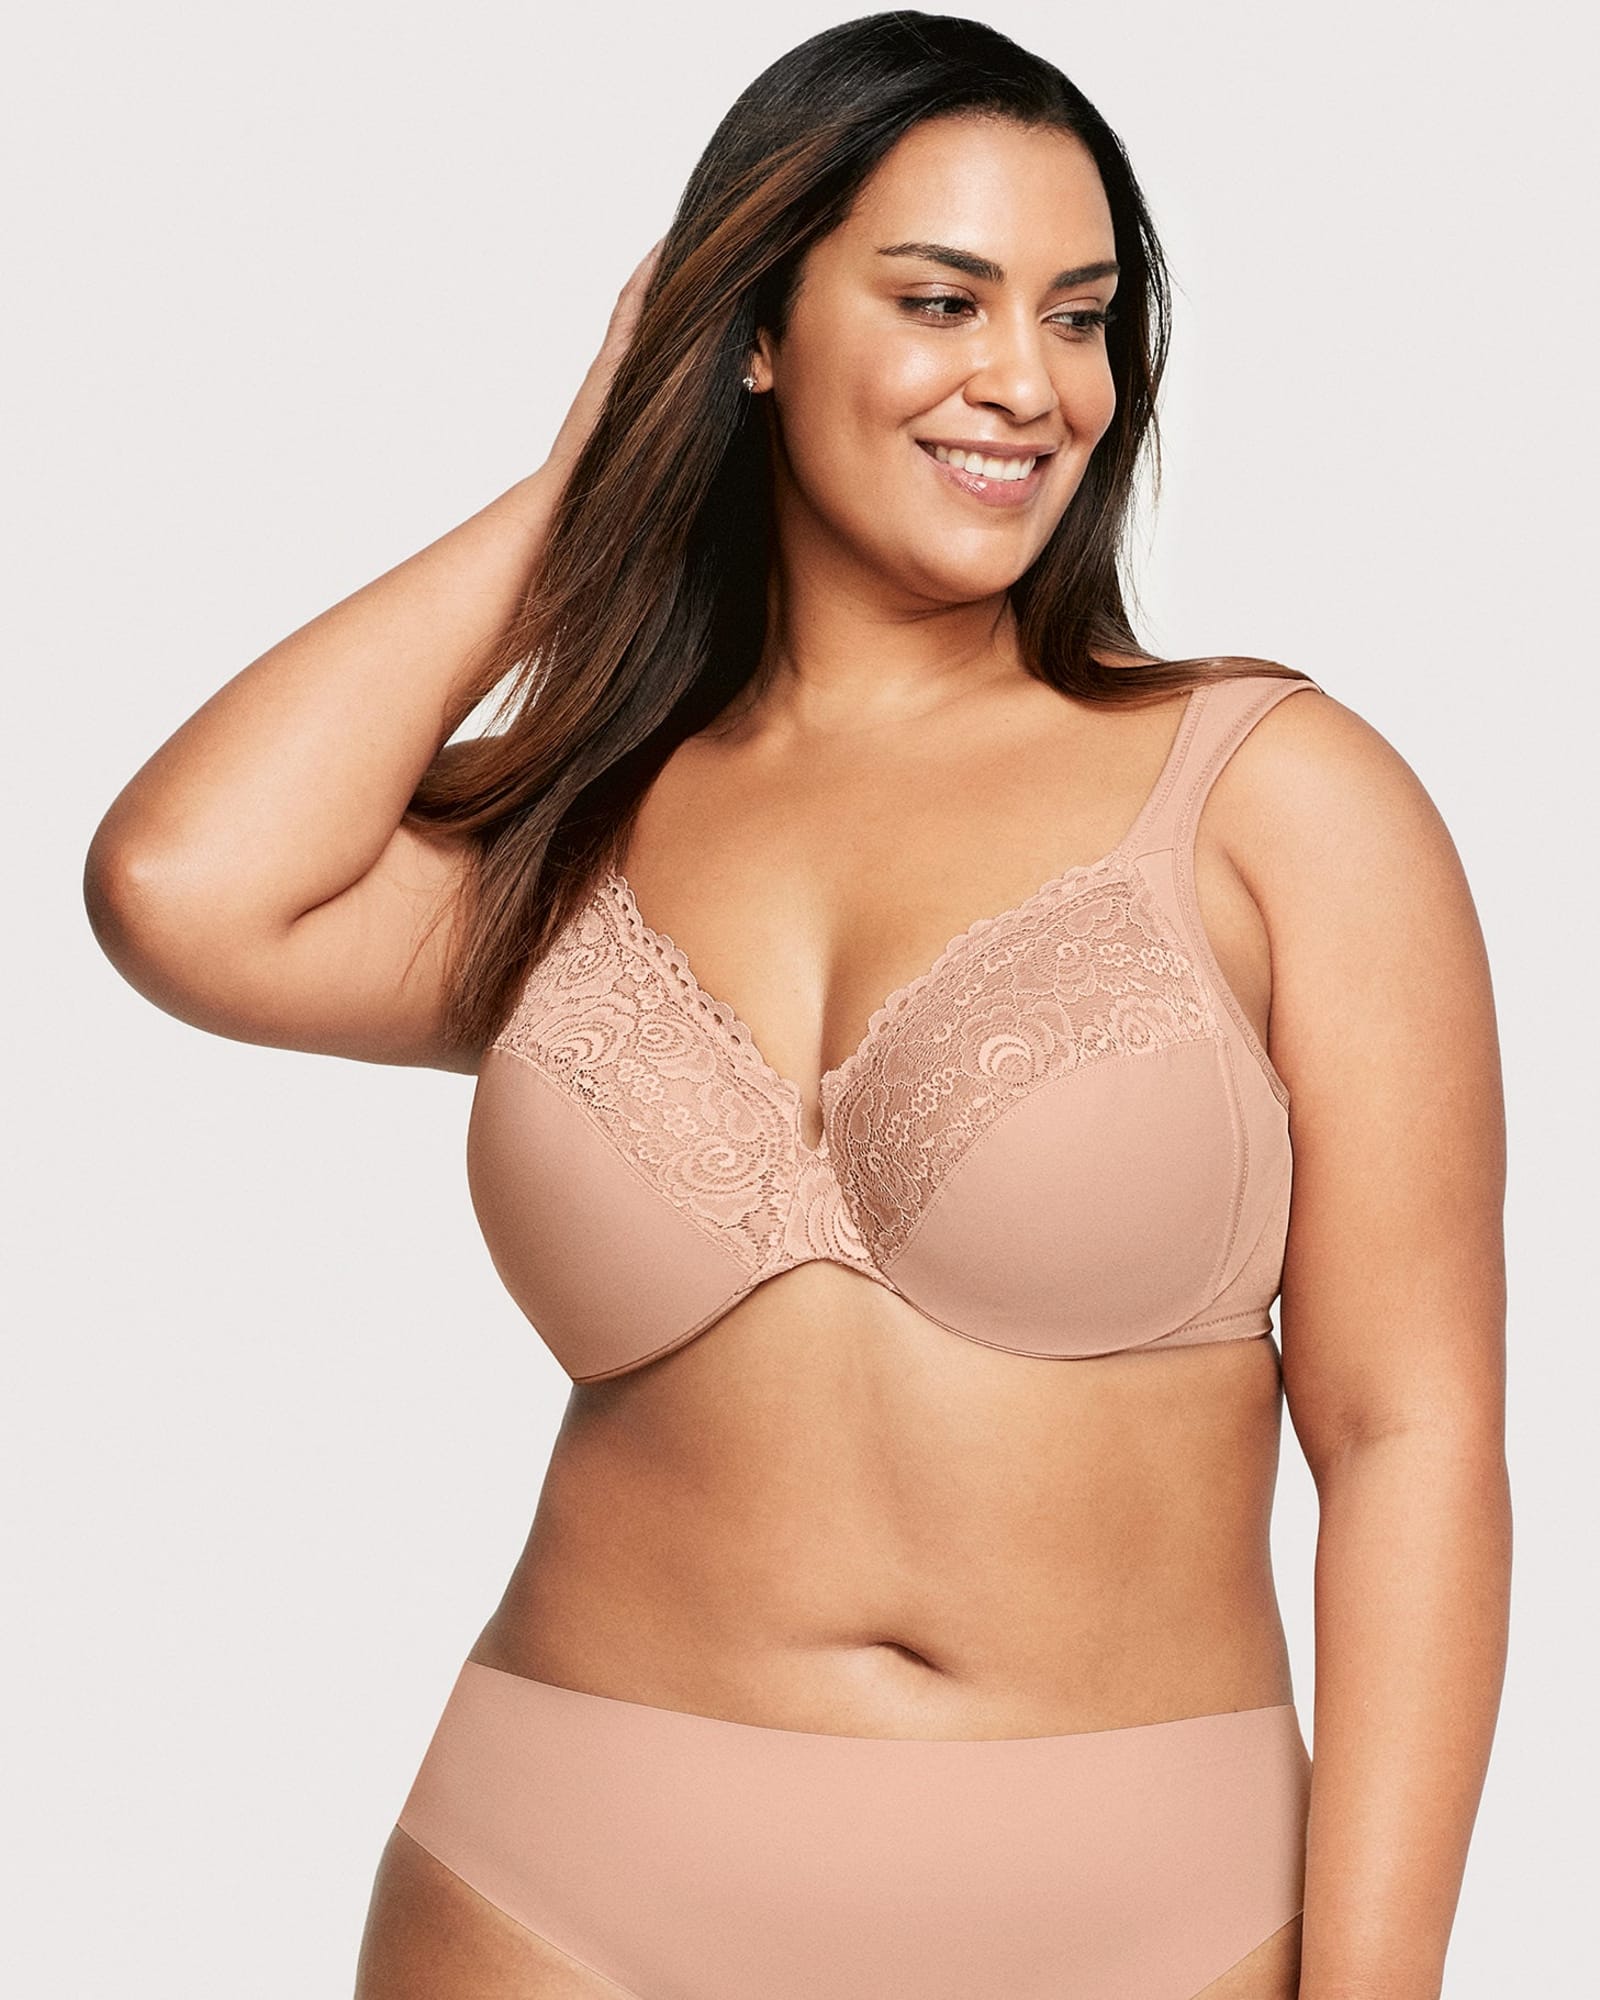 Bramour by Glamorise Womens Full Figure Plus Size Underwire Front